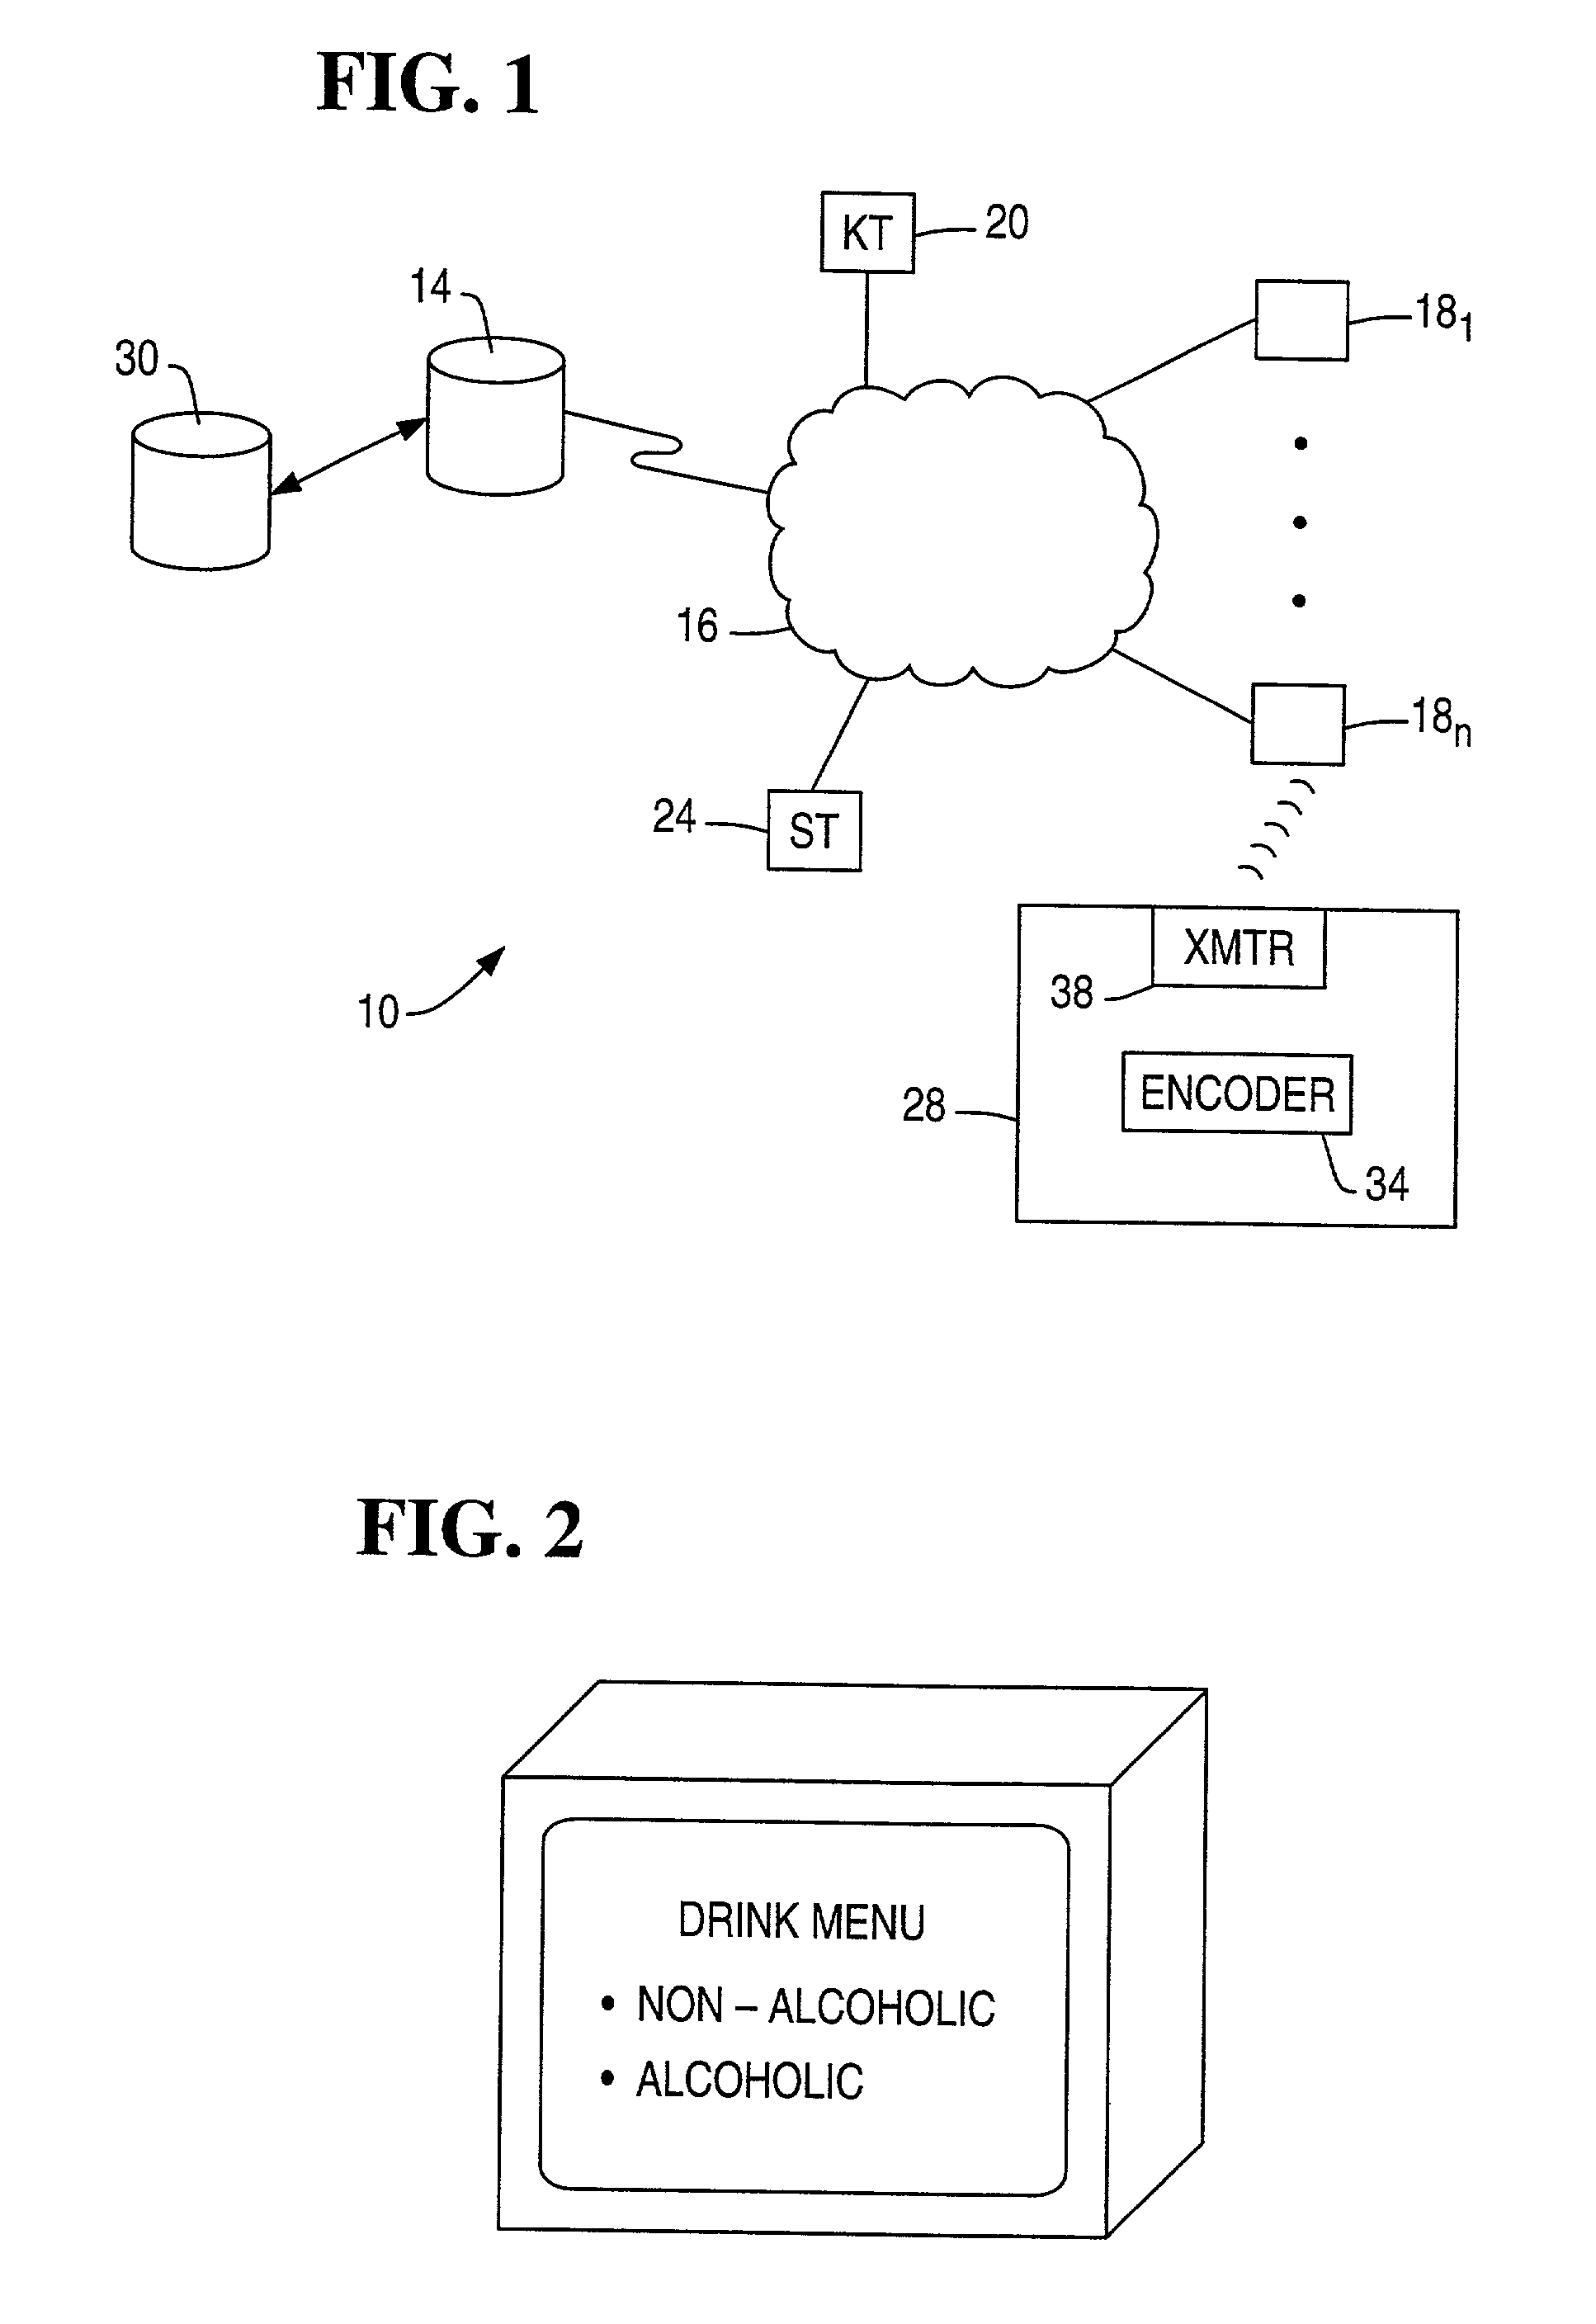 System and method for synchronizing restaurant menu display with progress through a meal